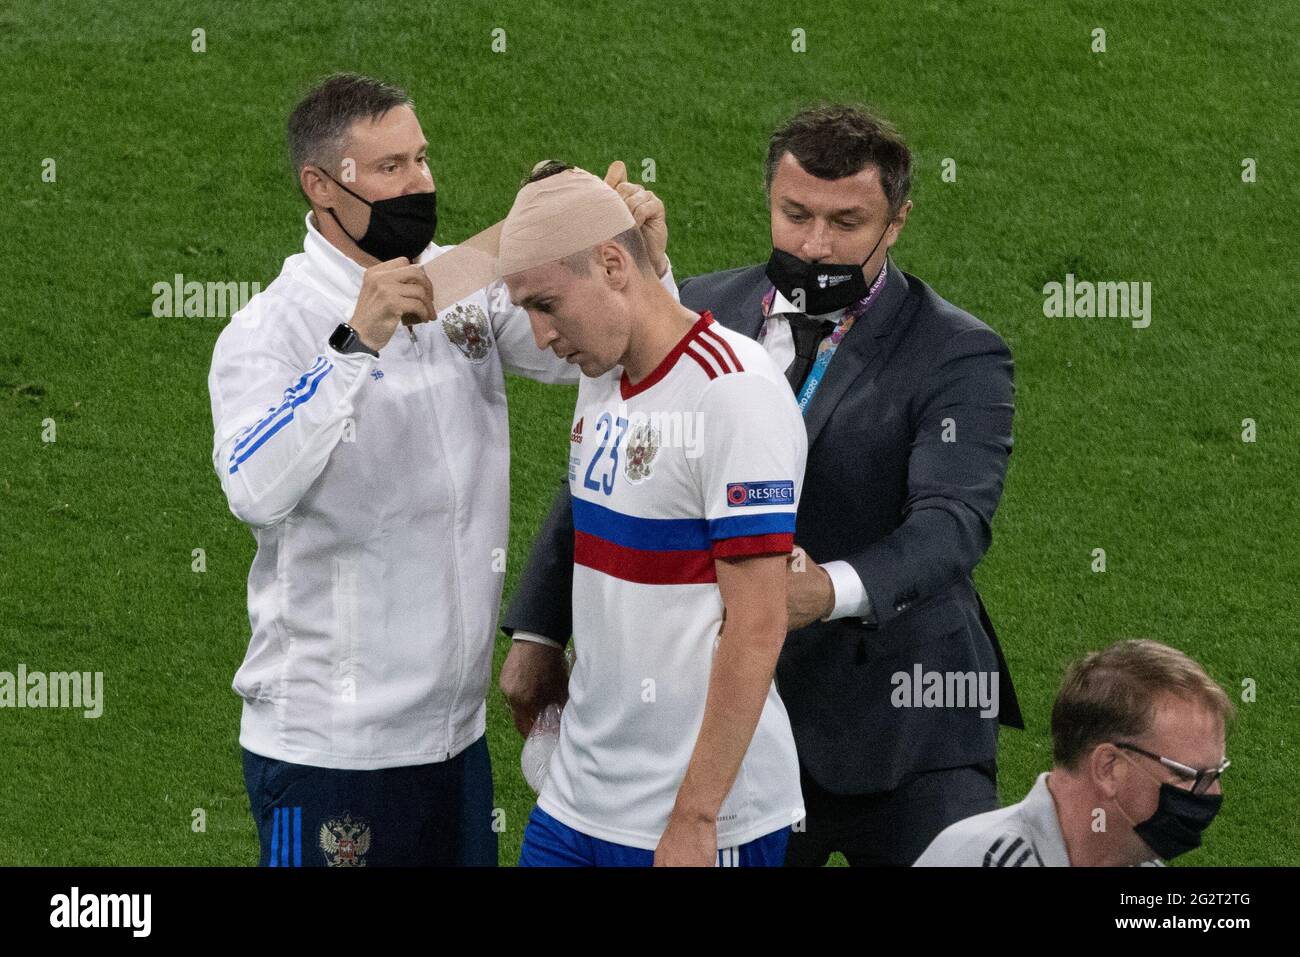 SAINT PETERSBURG, RUSSIA - JUNE 12: Daler Kuzyayev of Russia while receiving treatment during the UEFA Euro 2020 Championship Group B match between Belgium and Russia on June 12, 2021 in Saint Petersburg, Russia. (Photo by MB Media) Stock Photo